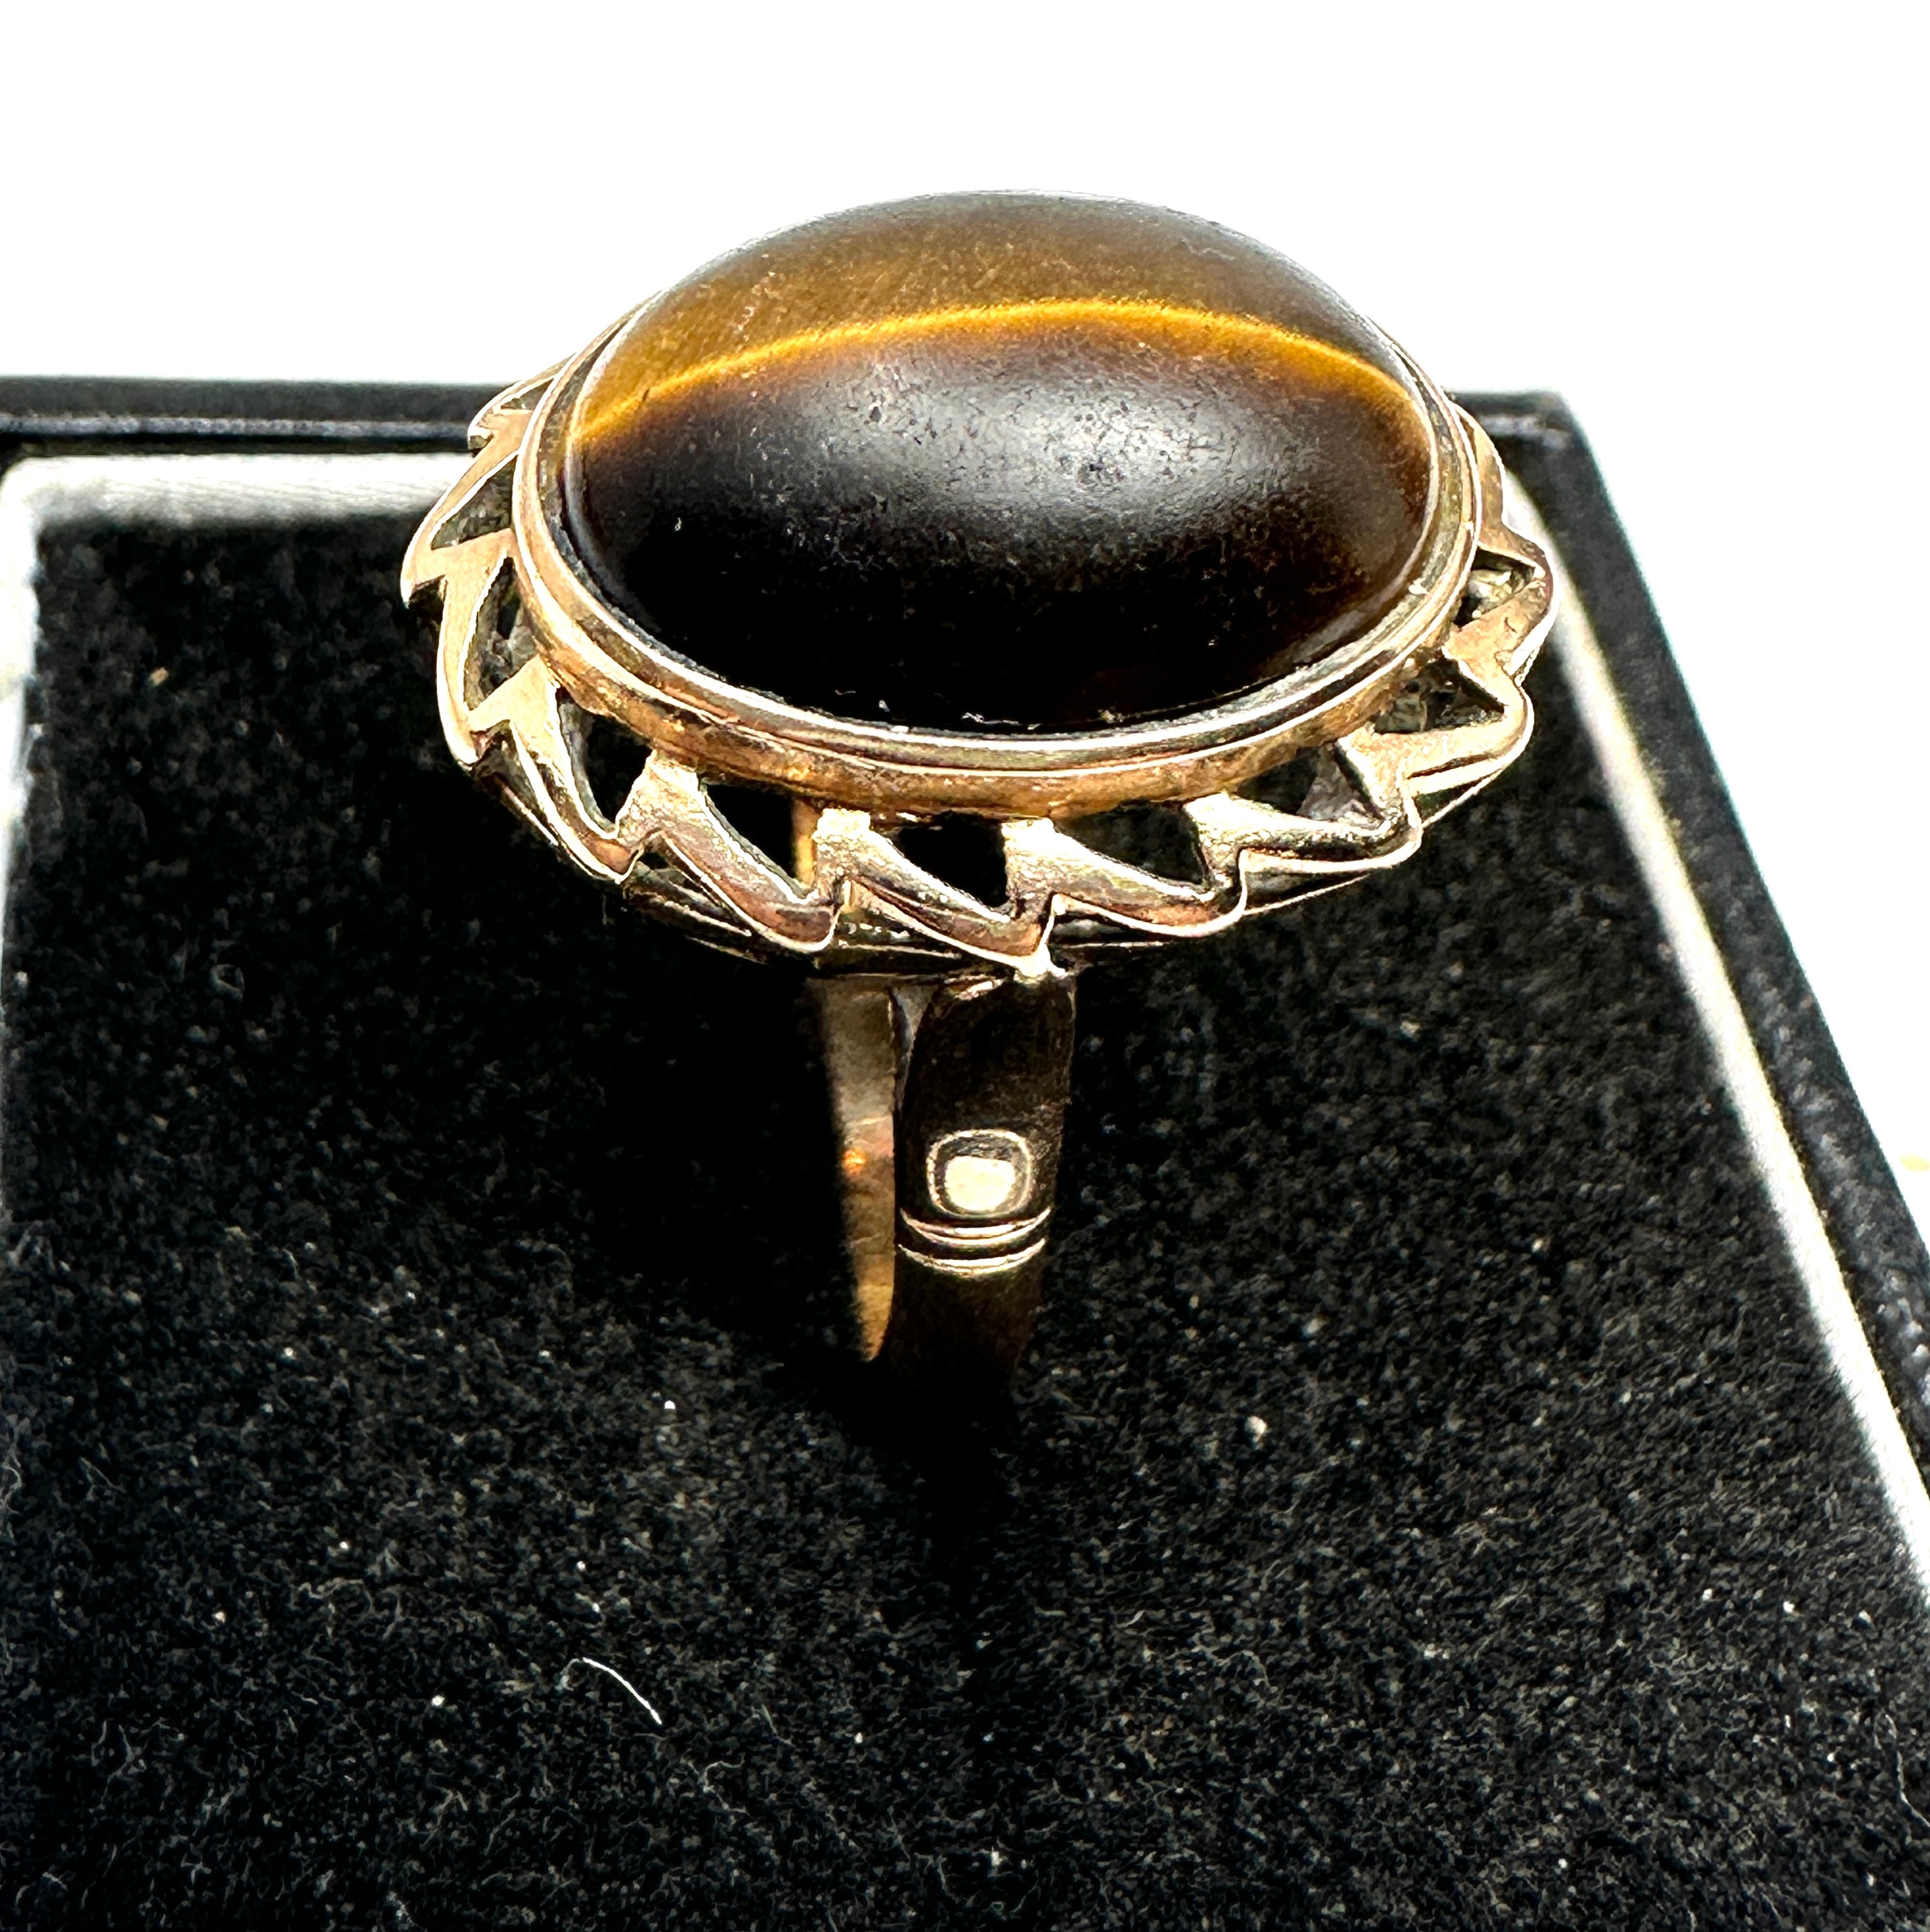 Vintage 14ct gold tigers eye ring weight 6.2g - Image 2 of 3